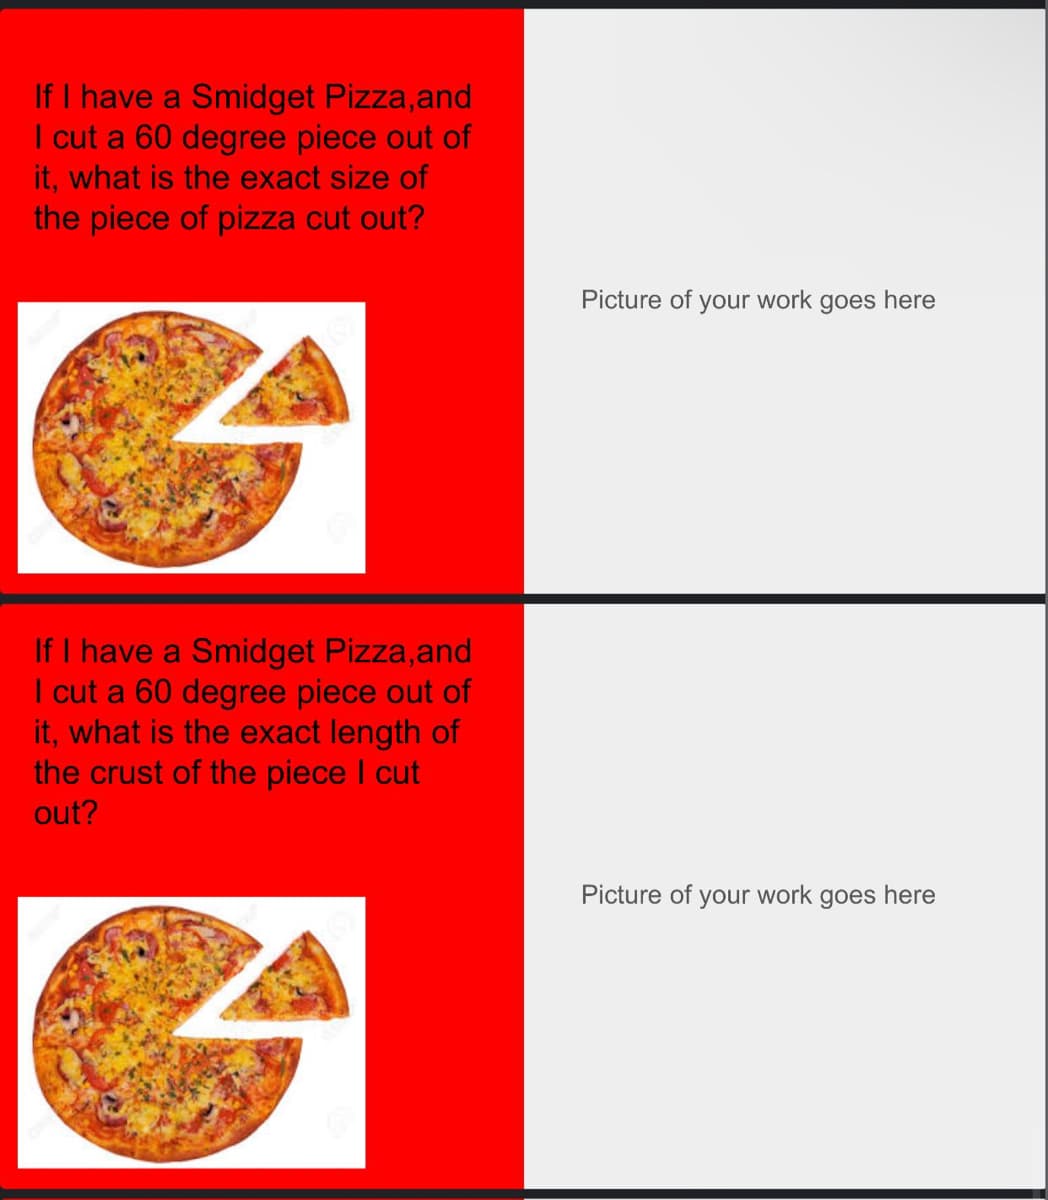 If I have a Smidget Pizza, and
I cut a 60 degree piece out of
it, what is the exact size of
the piece of pizza cut out?
If I have a Smidget Pizza,and
I cut a 60 degree piece out of
it, what is the exact length of
the crust of the piece I cut
out?
Picture of your work goes here
Picture of your work goes here